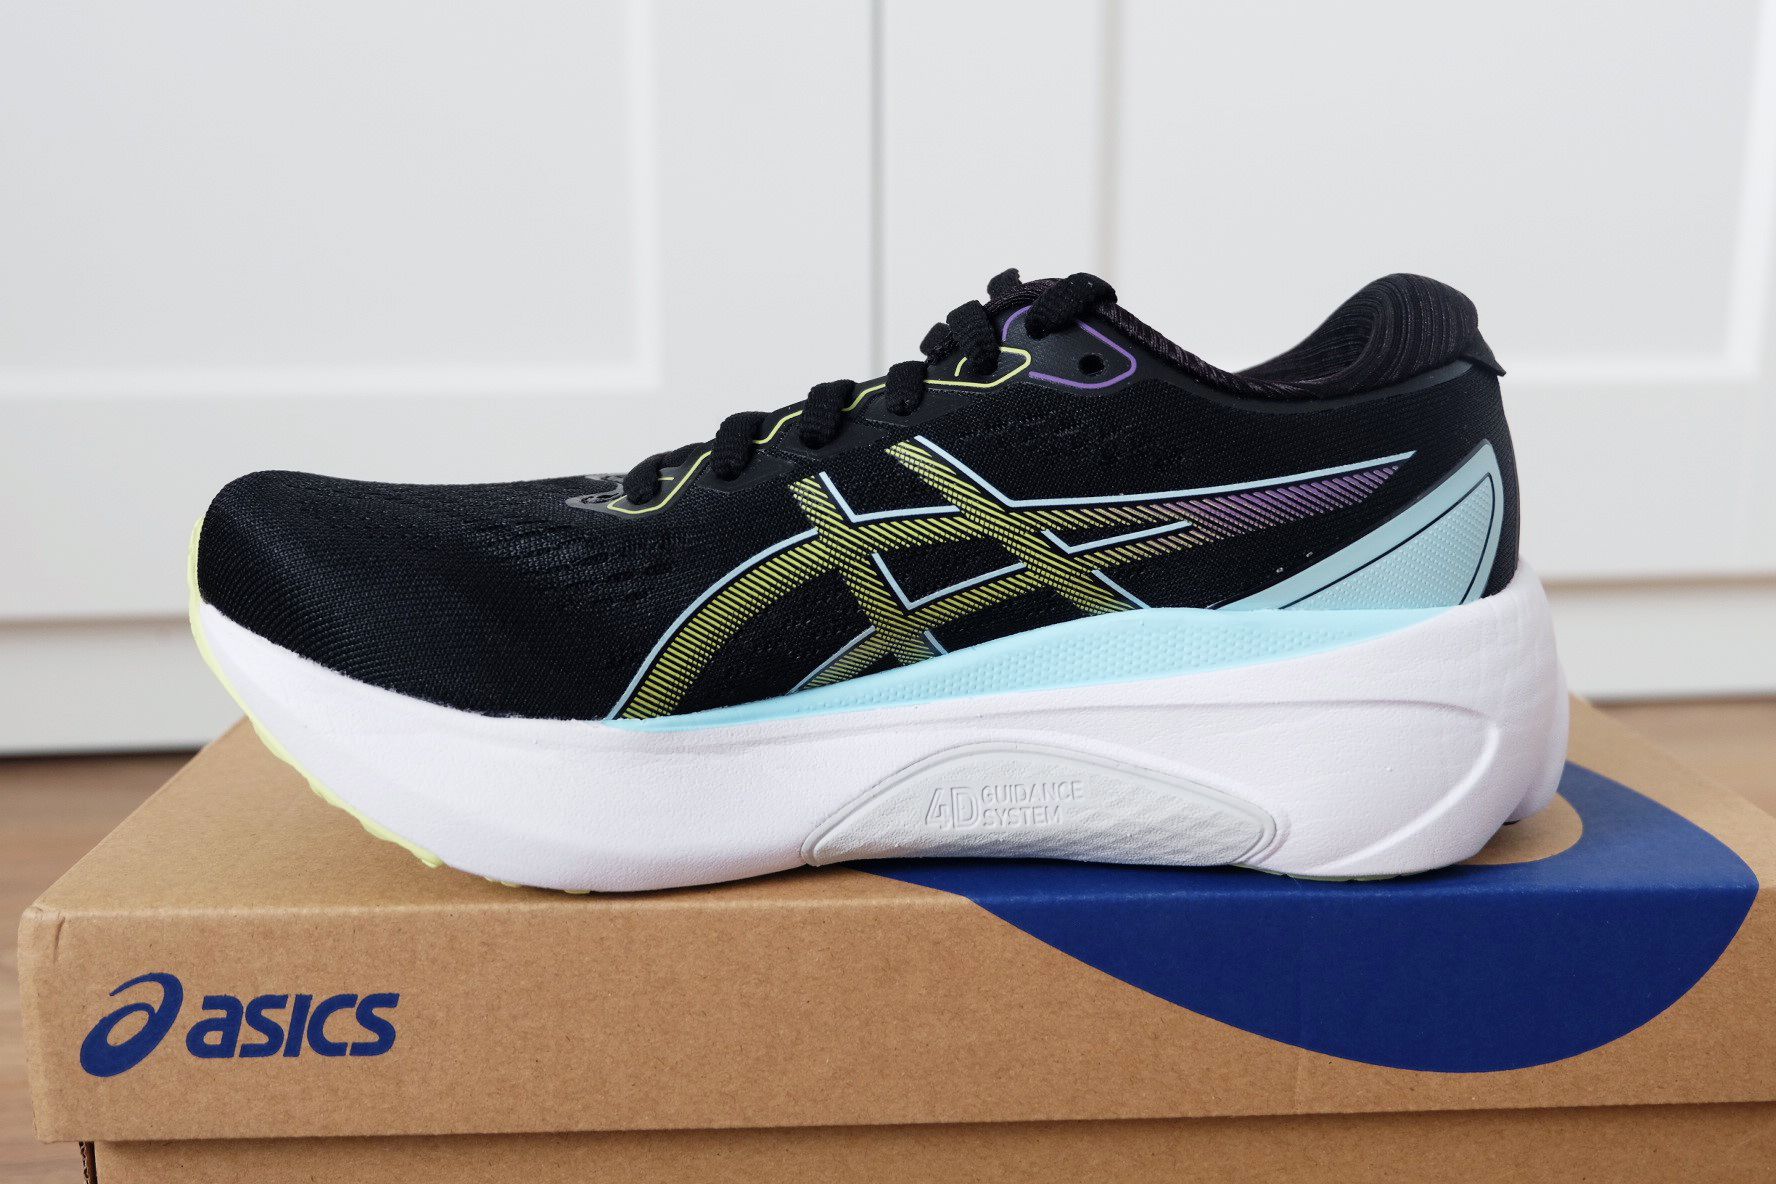 ASICS FrontRunner - Superior comfort and stability thanks to superior ...